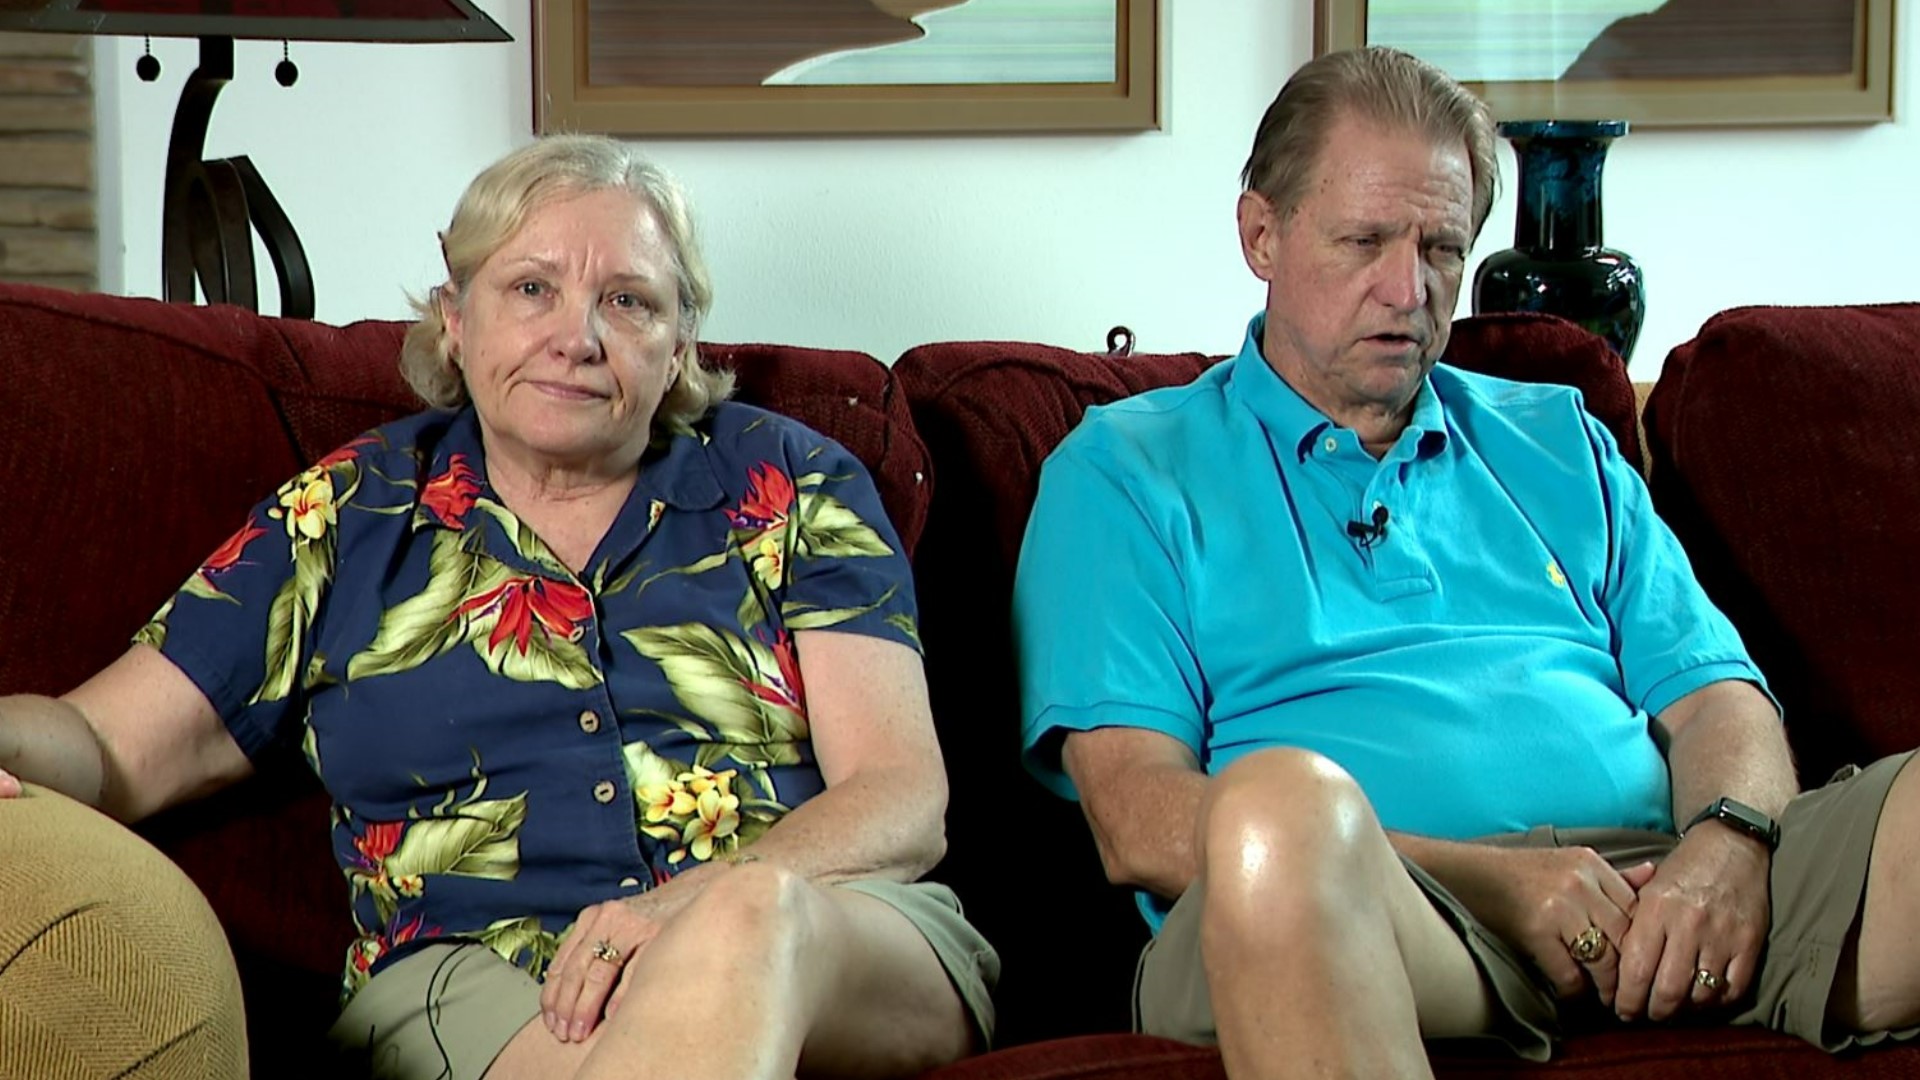 The couple said the way the envelope was mailed makes them worried it could be mass produced by scammers fishing for victims.